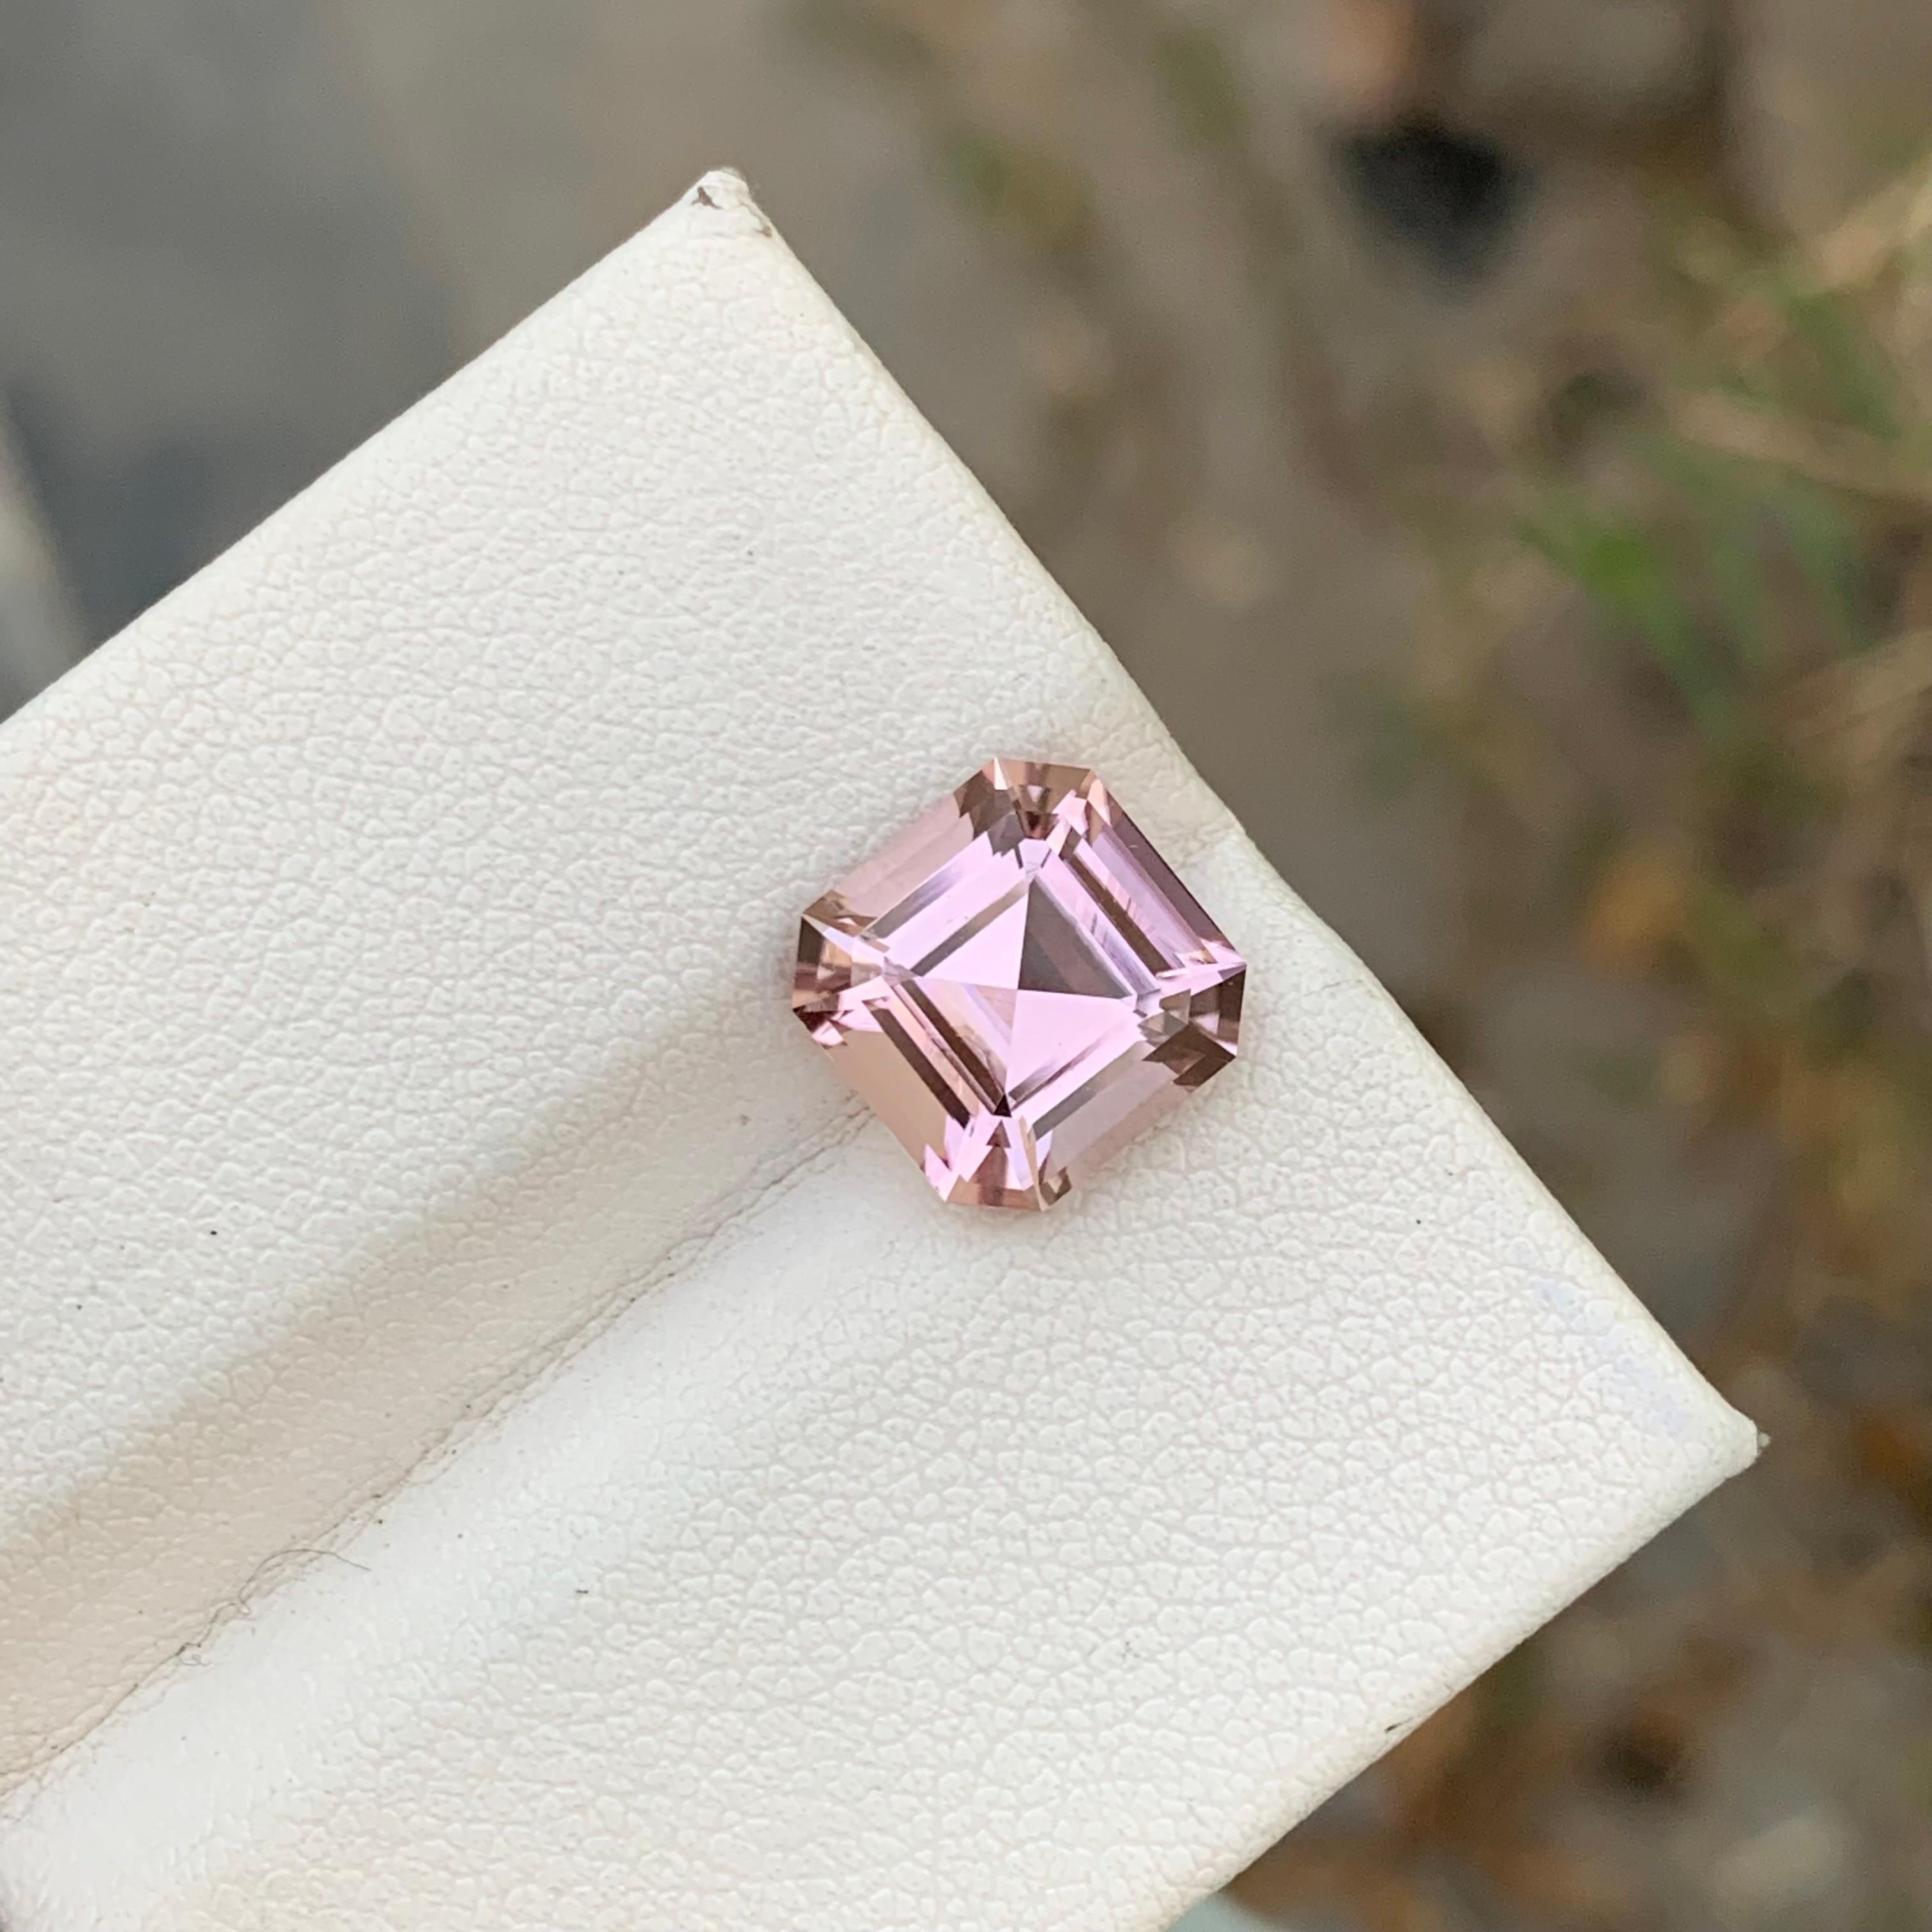 Loose Tourmaline 
Weight: 4.15 Carats 
Dimension: 9.5x9.5x6.4 Mm
Origin: Afghanistan 
Shape: Square 
Cut: Asscher 
Color: Soft Pink
Treatment: Non
Certificate: On Demand 
Soft pink tourmaline, also known as 